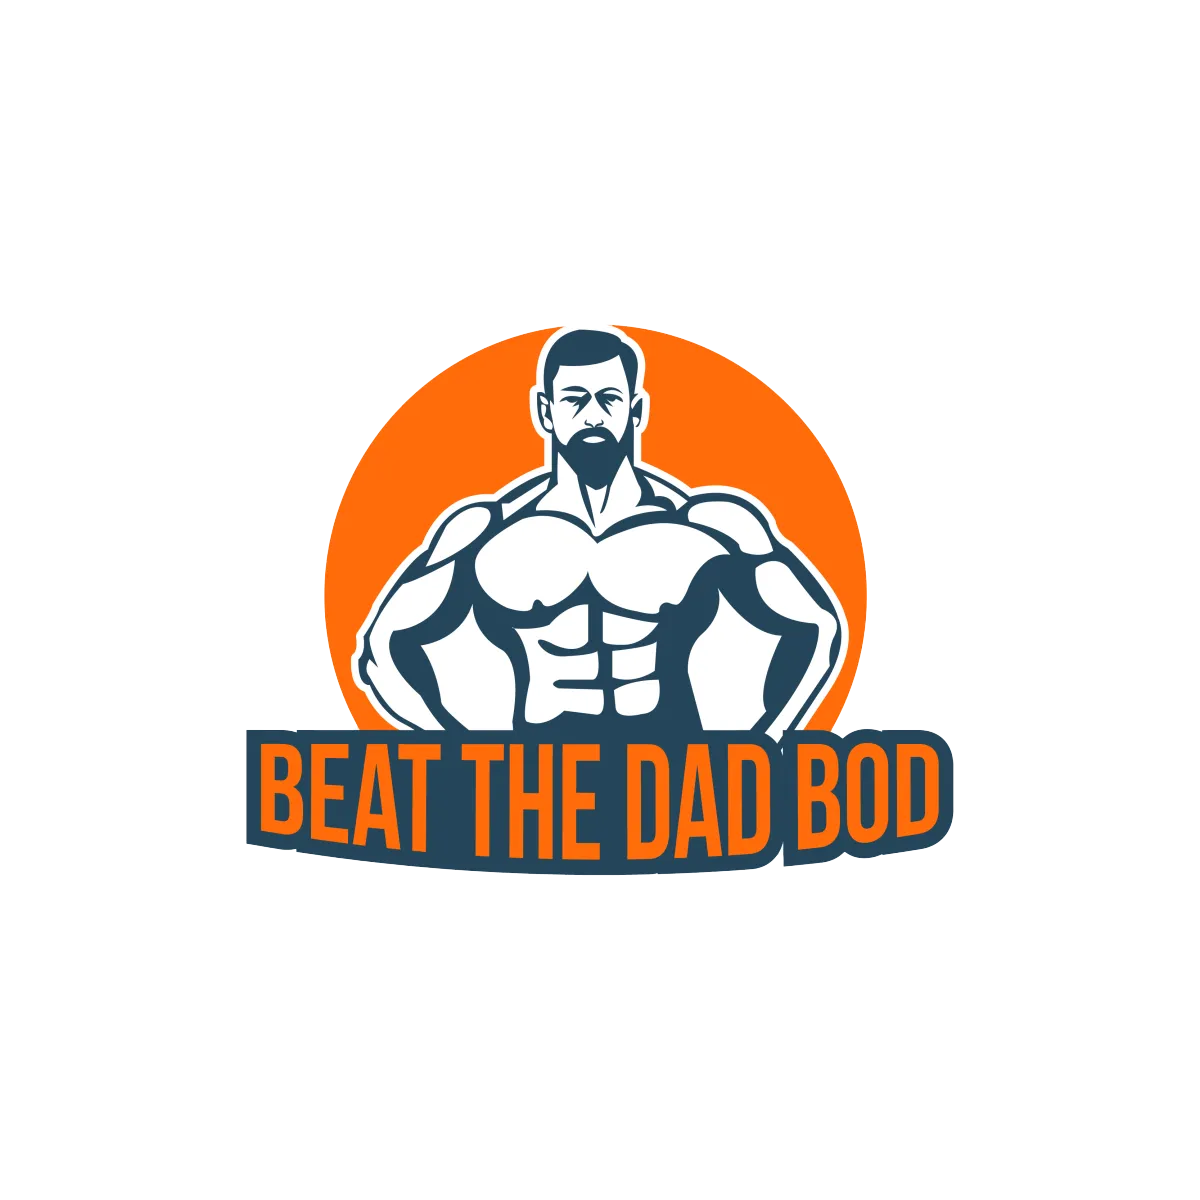 Brand Logo - dad bod dad bods fat dad fat dads Beat The Dad Bod USA Beat The Dad Bod Coaching Health Consultant Remote Fitness Coach Health Coaching Nutritionist dad bod cookie dad bod dad bod workout plan at fitness coach dad fitness dad bod gym fitness remote the health and fitness coach health fitness dad bod fitness health fitness usa the fitness coach coach to fitness consultant fitness fit coach workout home bod coach remote fitness wellness coach fitness and wellness coach dad bod workout health and fitness coach health fitness coach fitness coach usa remote fitness coach fitness coach home workout online personal trainer fitness coach app personal trainer at home personal trainer app gym guys gym coach online gym trainer best personal trainer app fitness on the go personal training consultants online fitness trainer online fitness coach fitness coach app training coach coach gym personal trainer personal trainer gym trainer app fitness trainer course